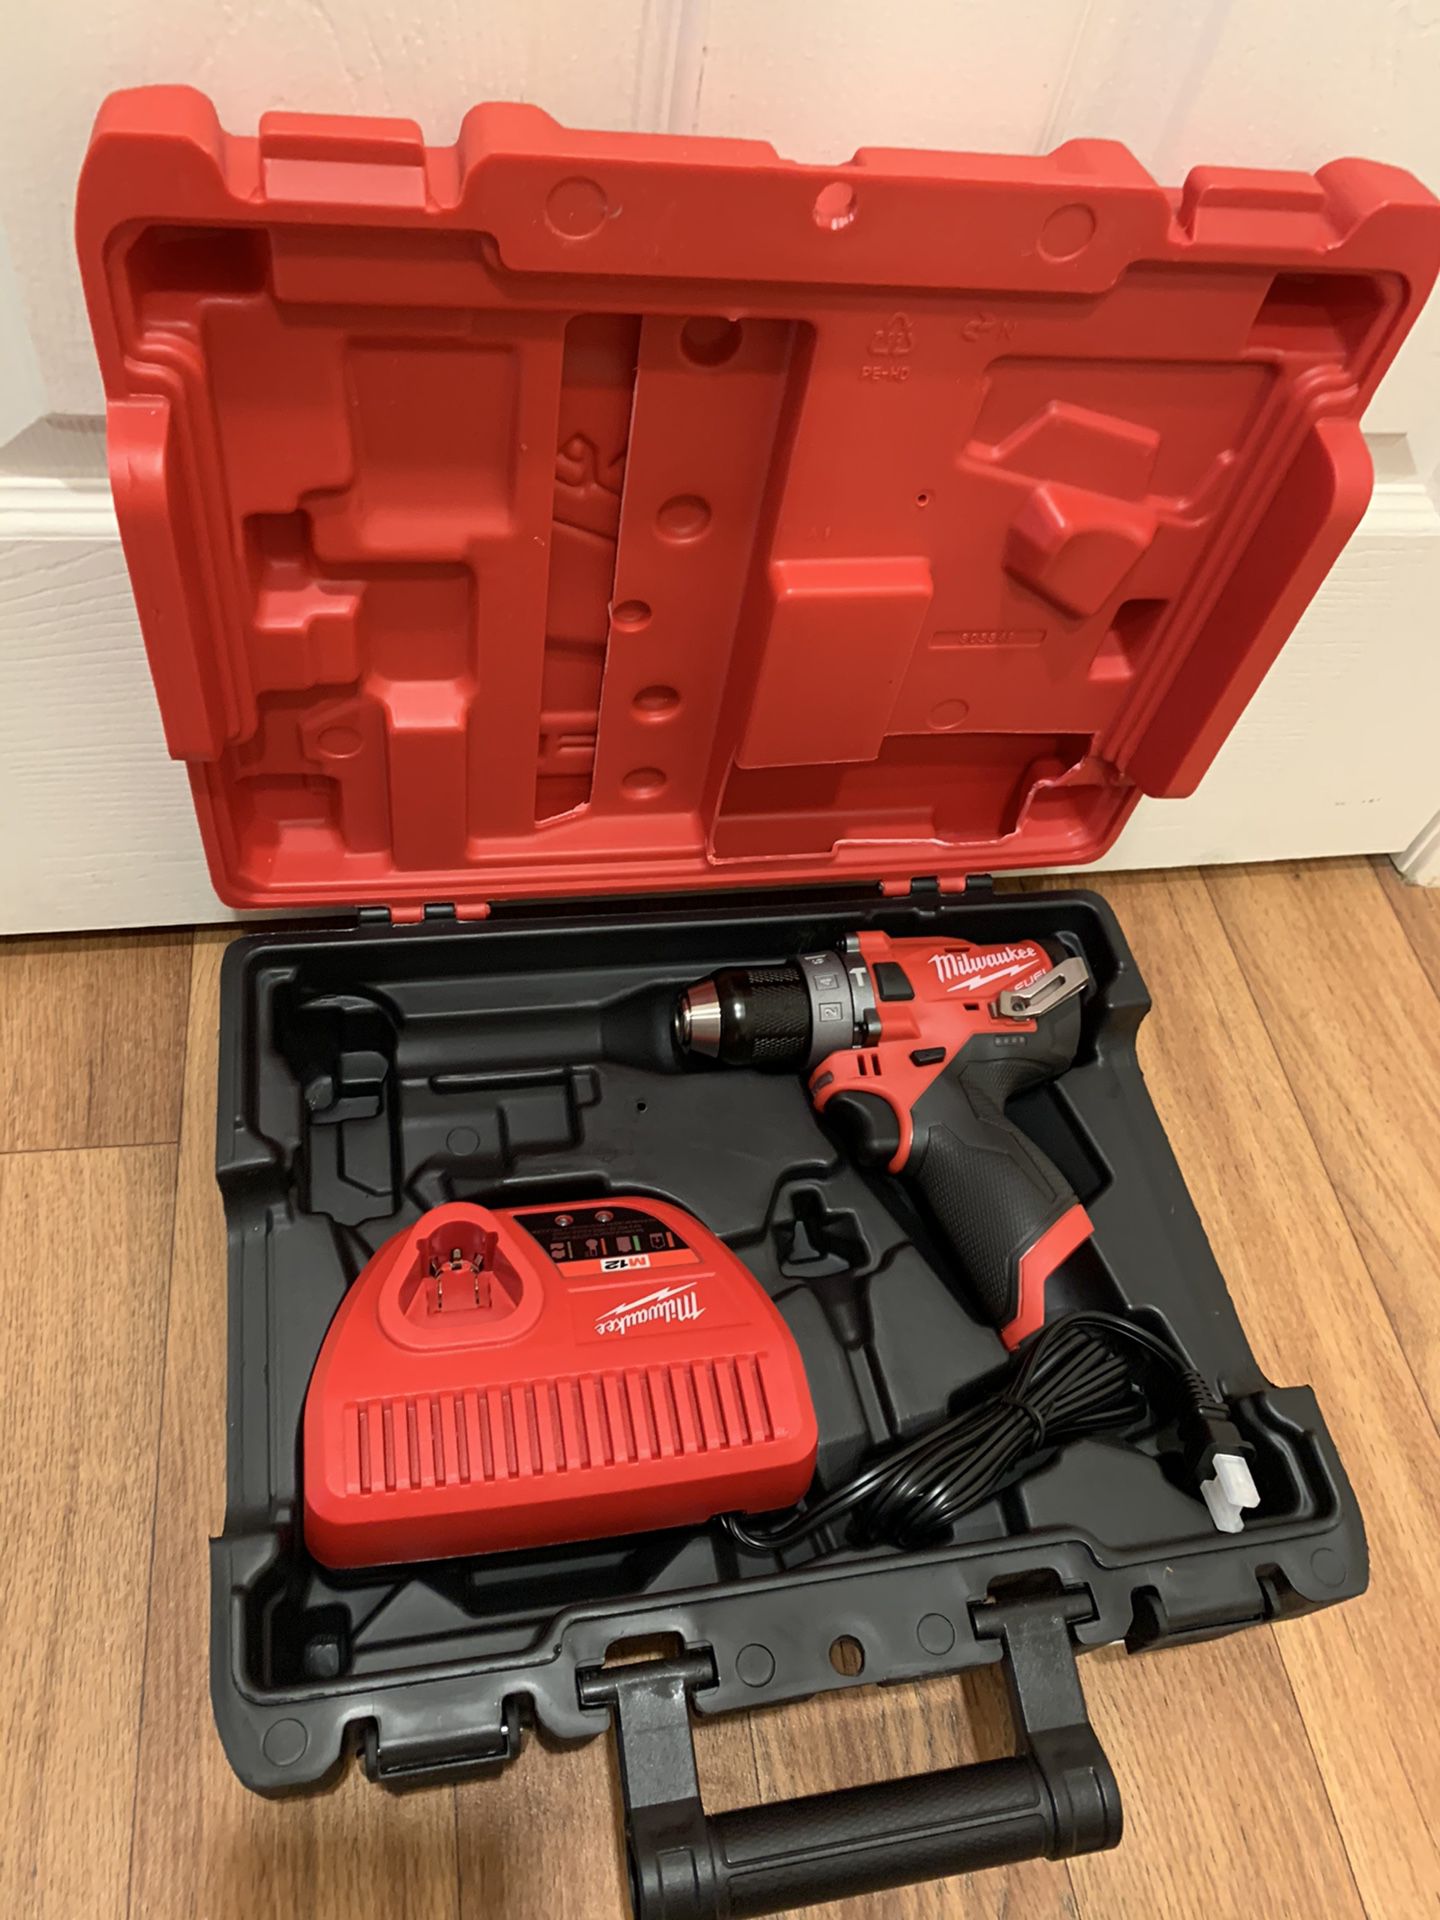 Milwaukee m12 drill with charger and hard case. $100 price is firm